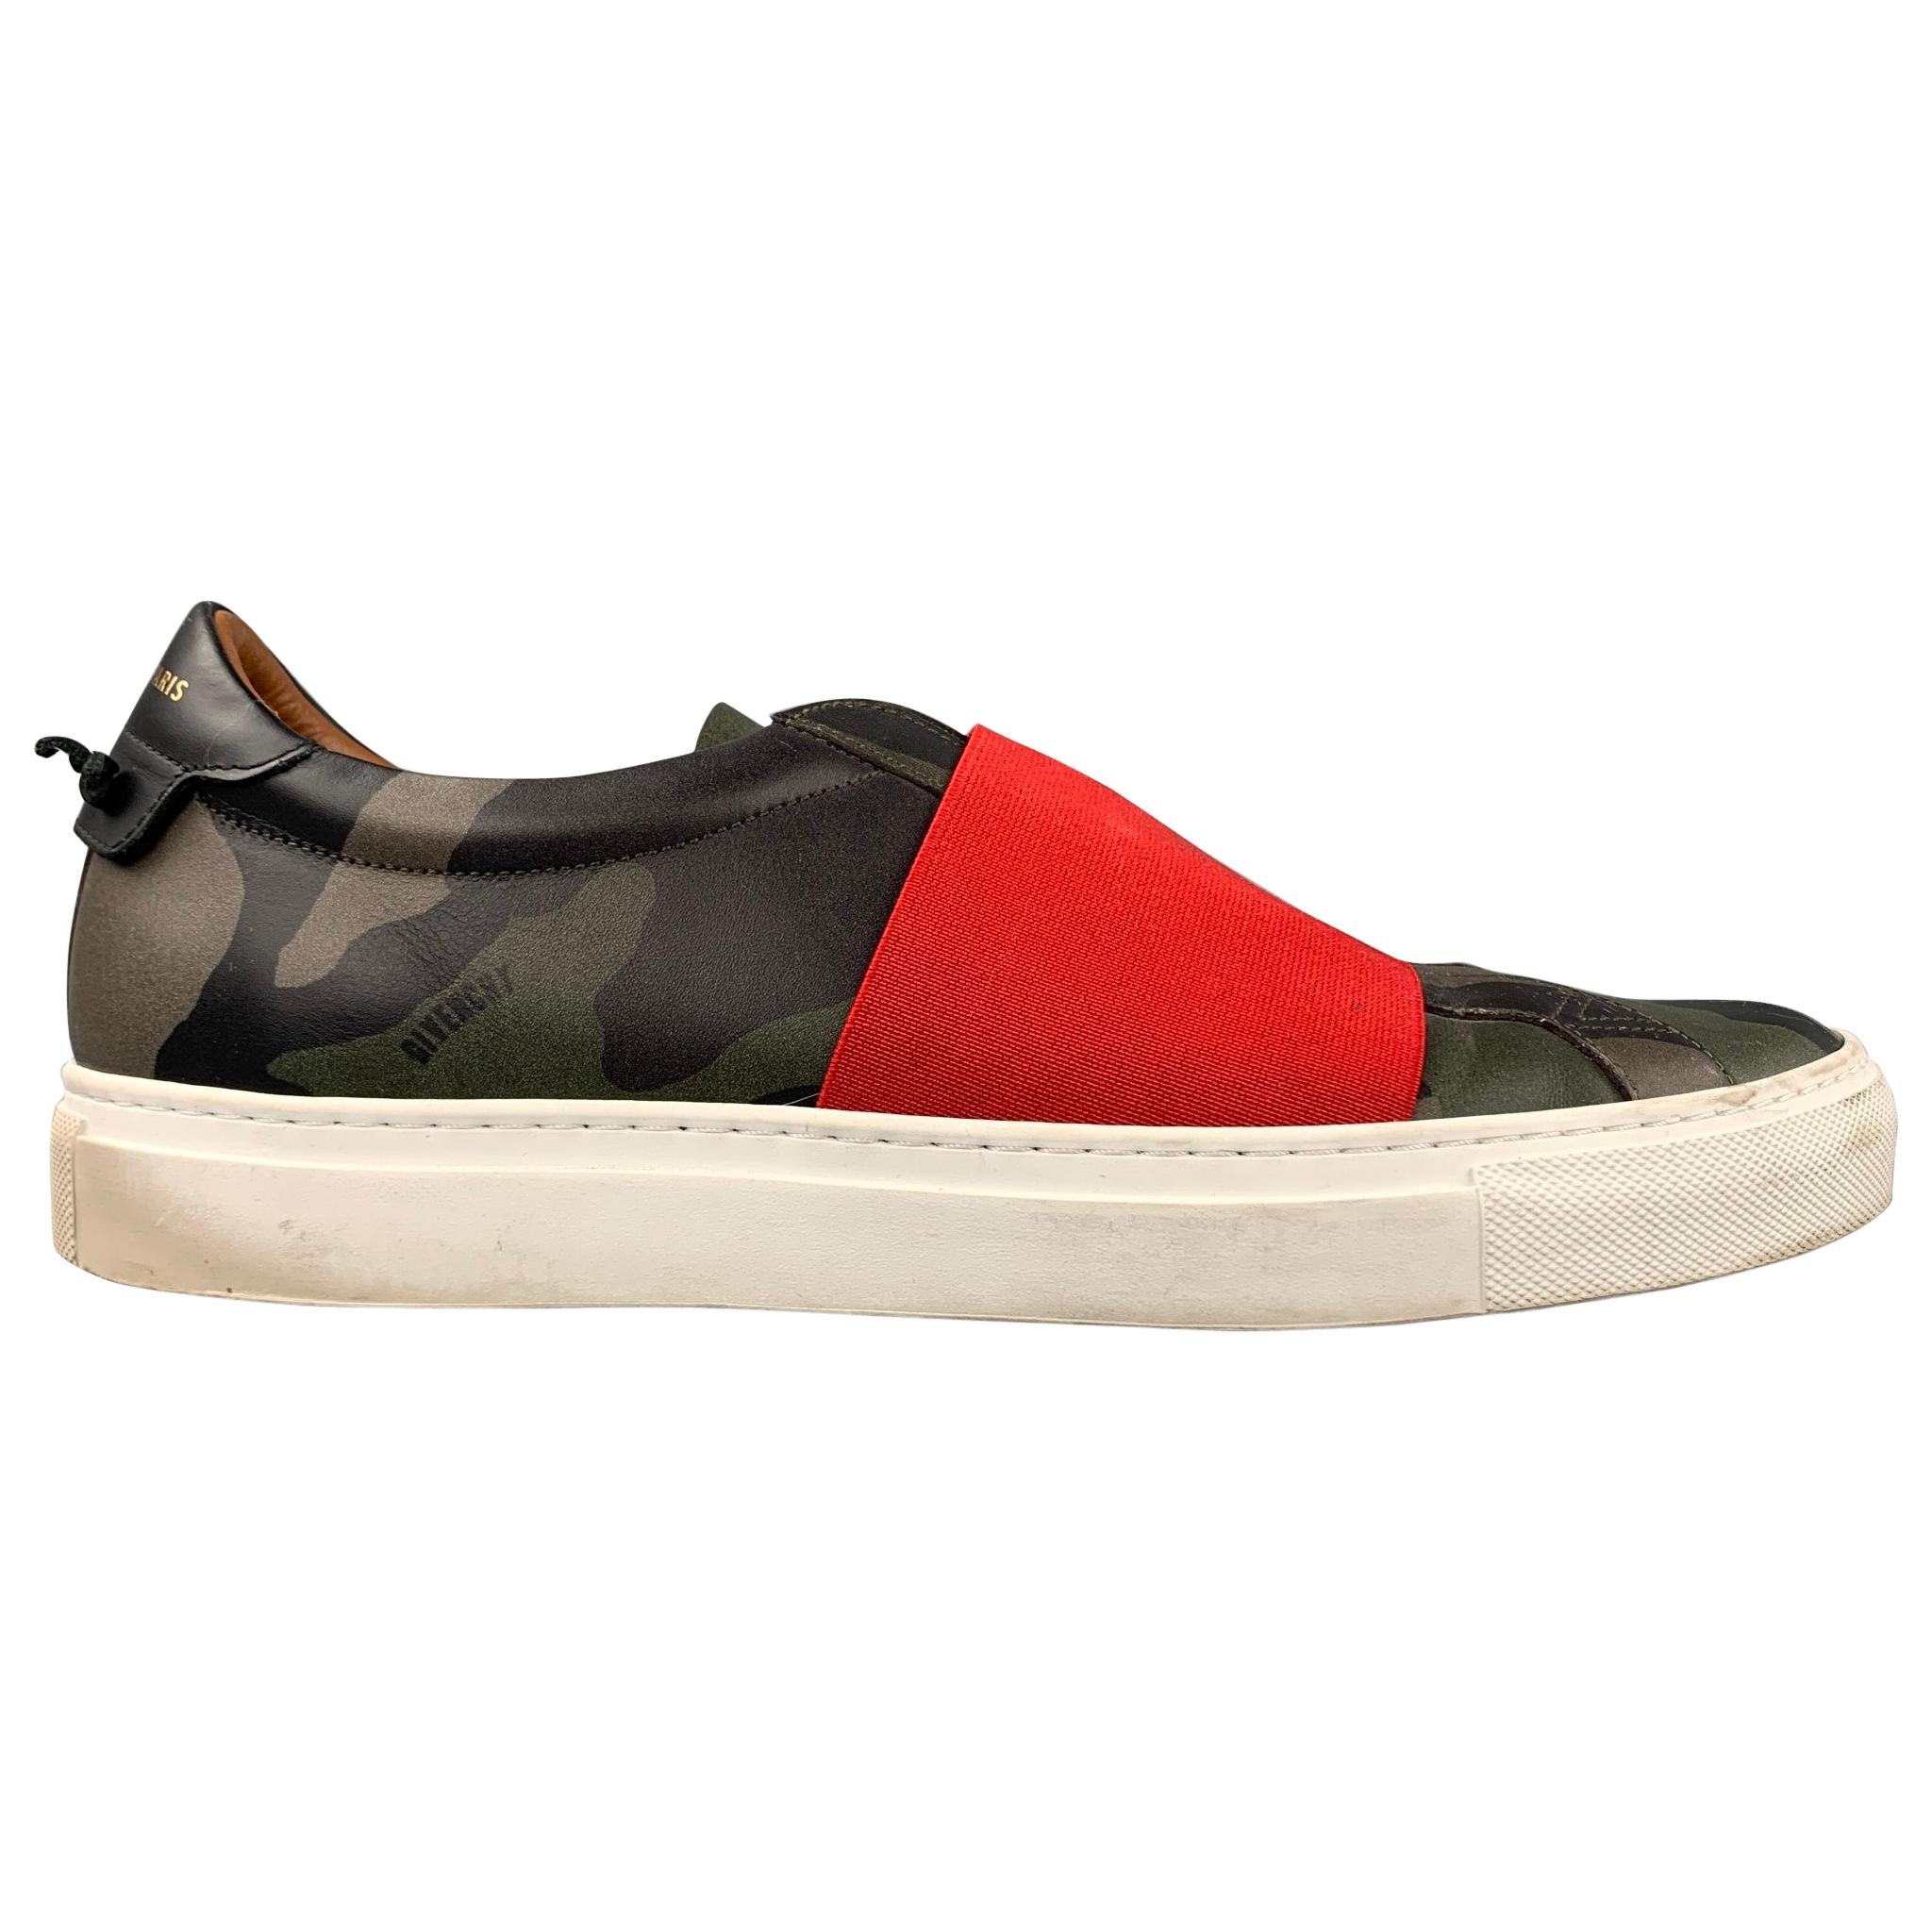 GIVENCHY Size 9 Olive Camouflage Leather Slip On Sneakers